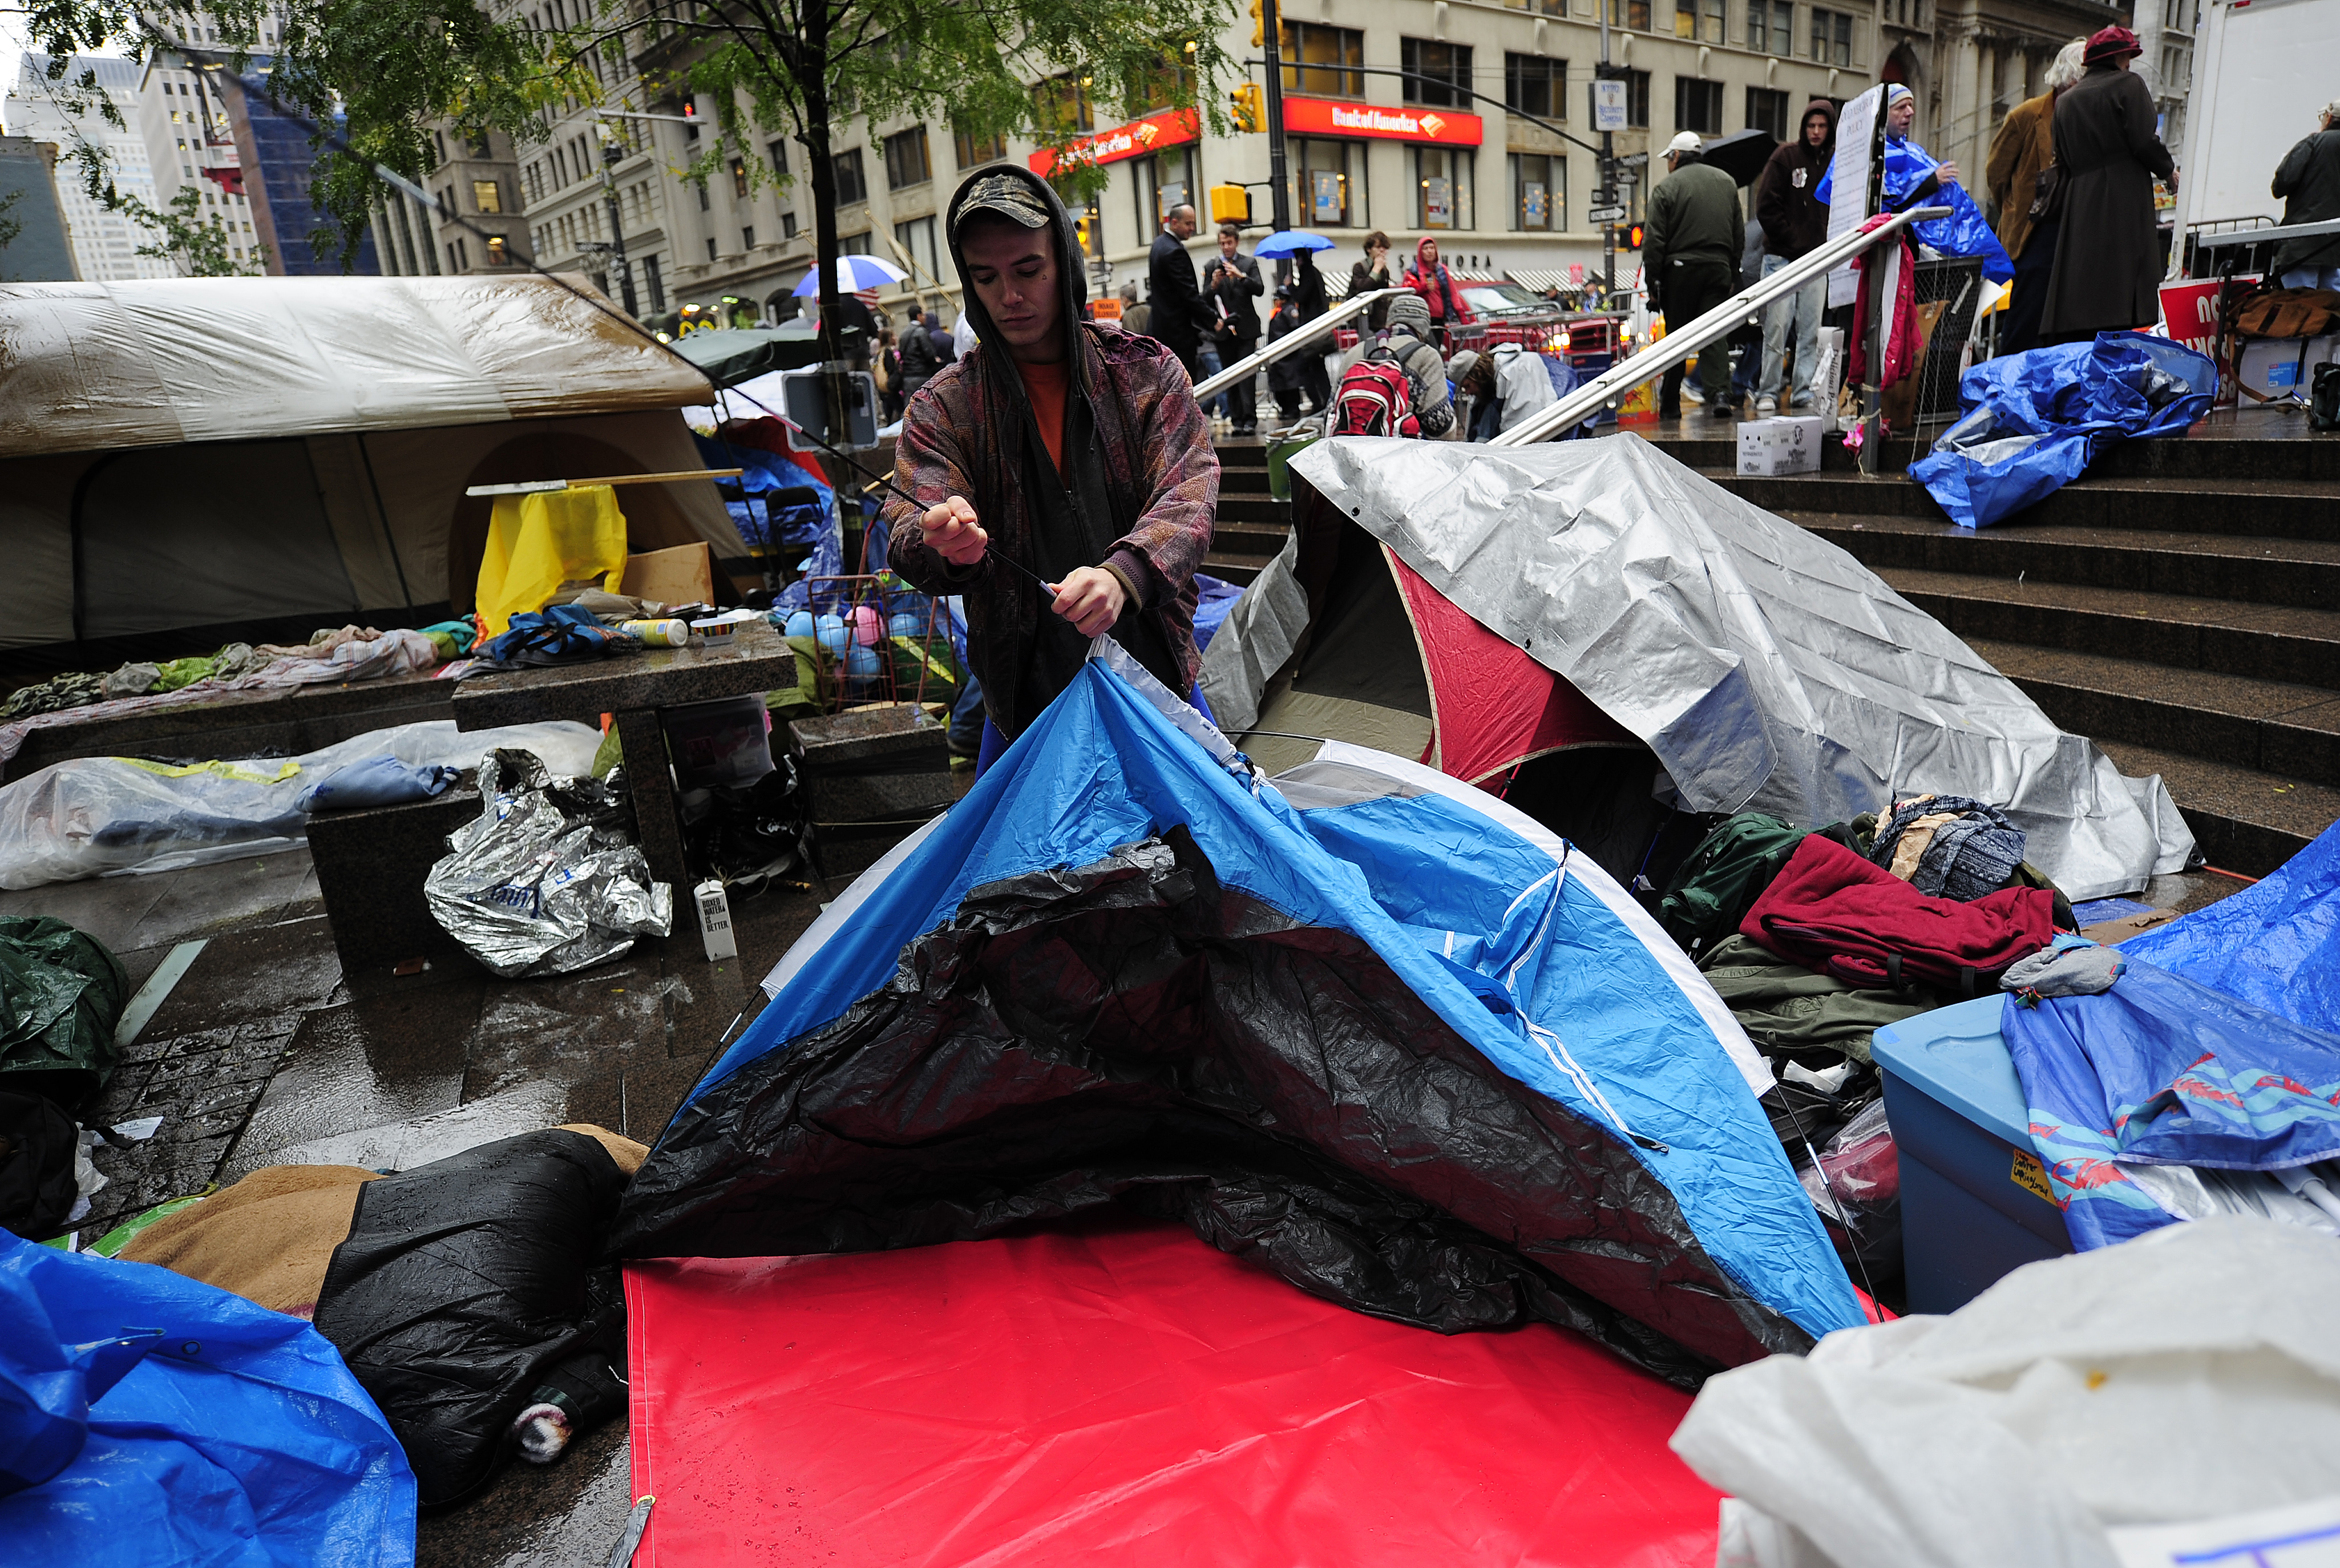 An Occupy Wall Street member sets up a tent 